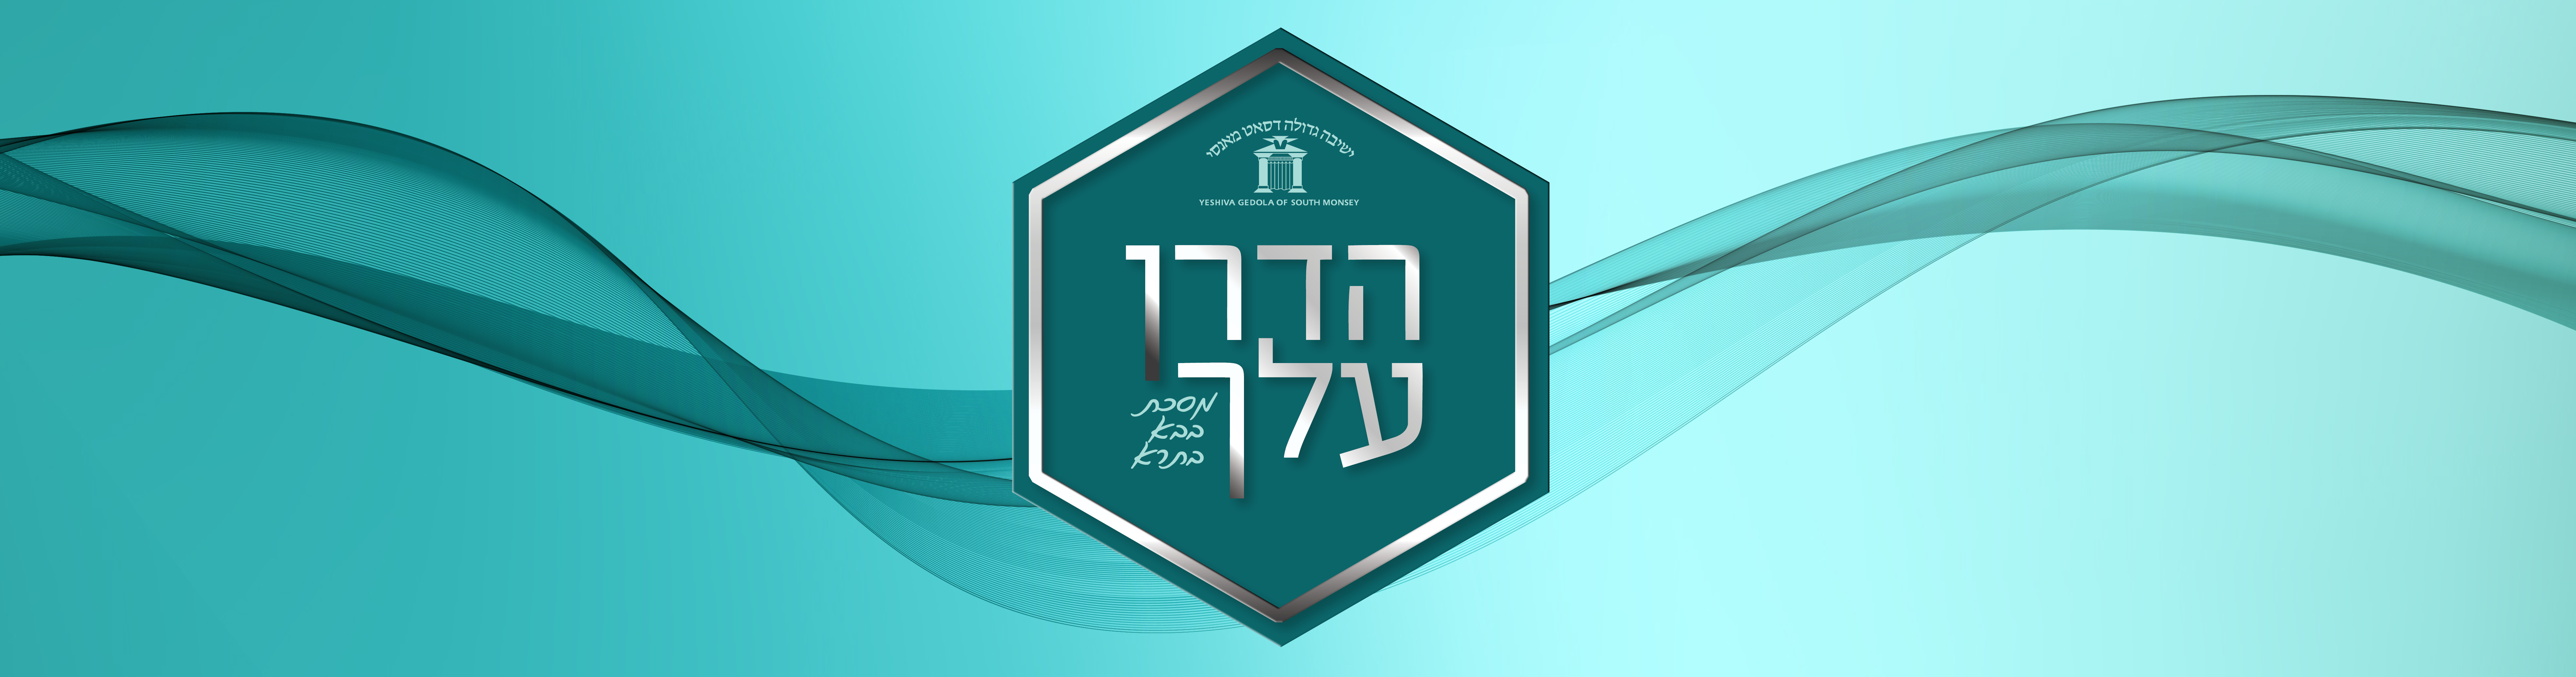 YGSM Siyum Campaign Top Banner